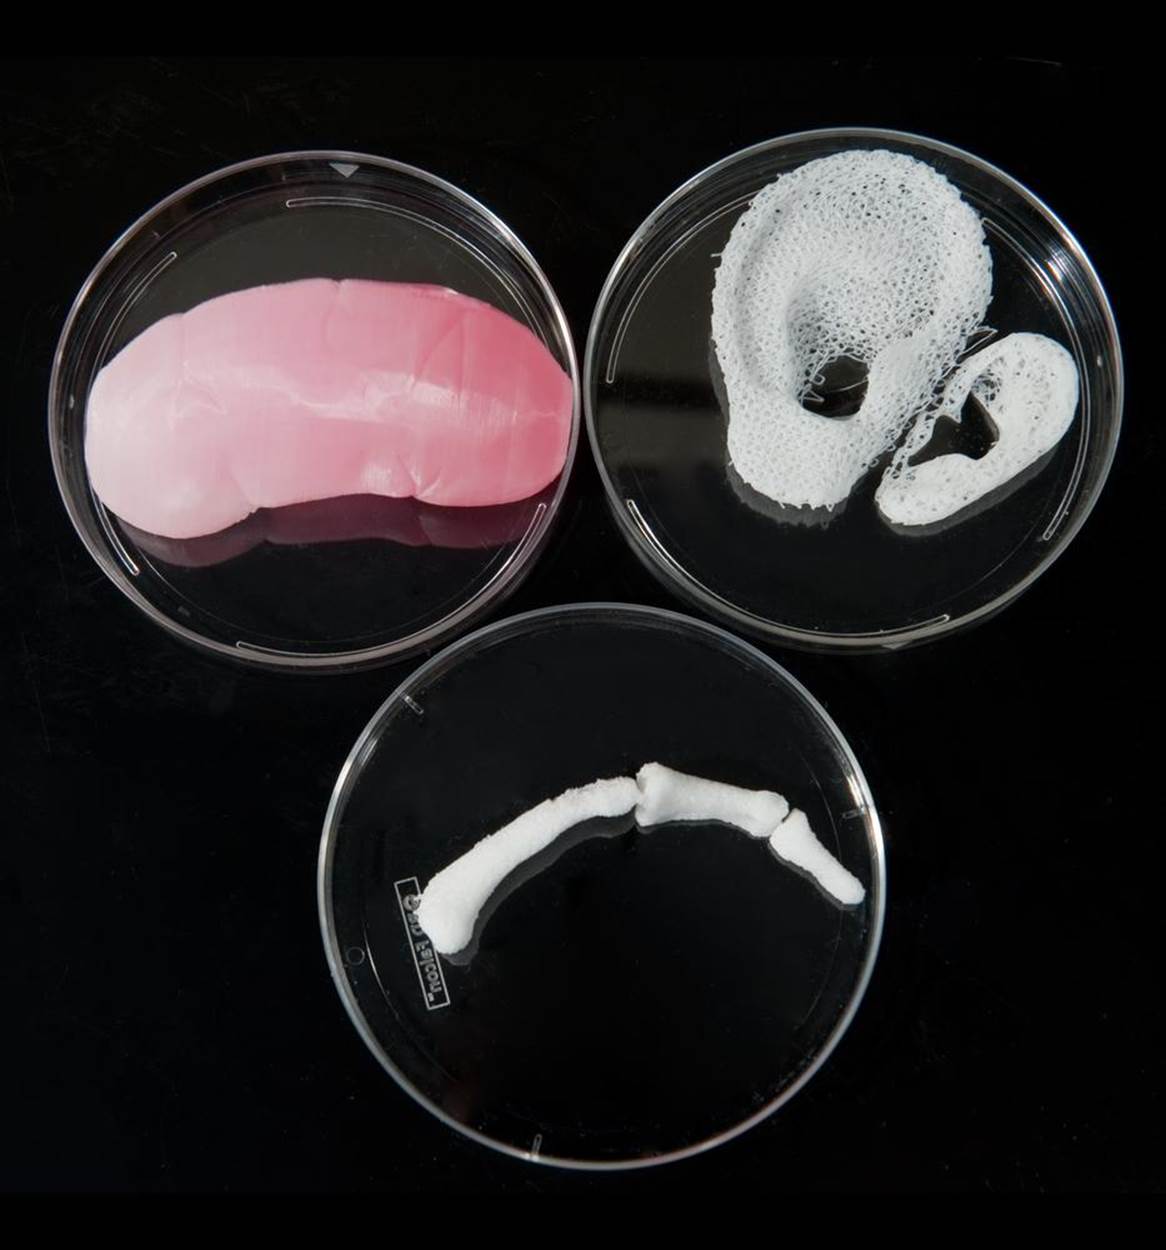 3D printed replacement tissues and organs